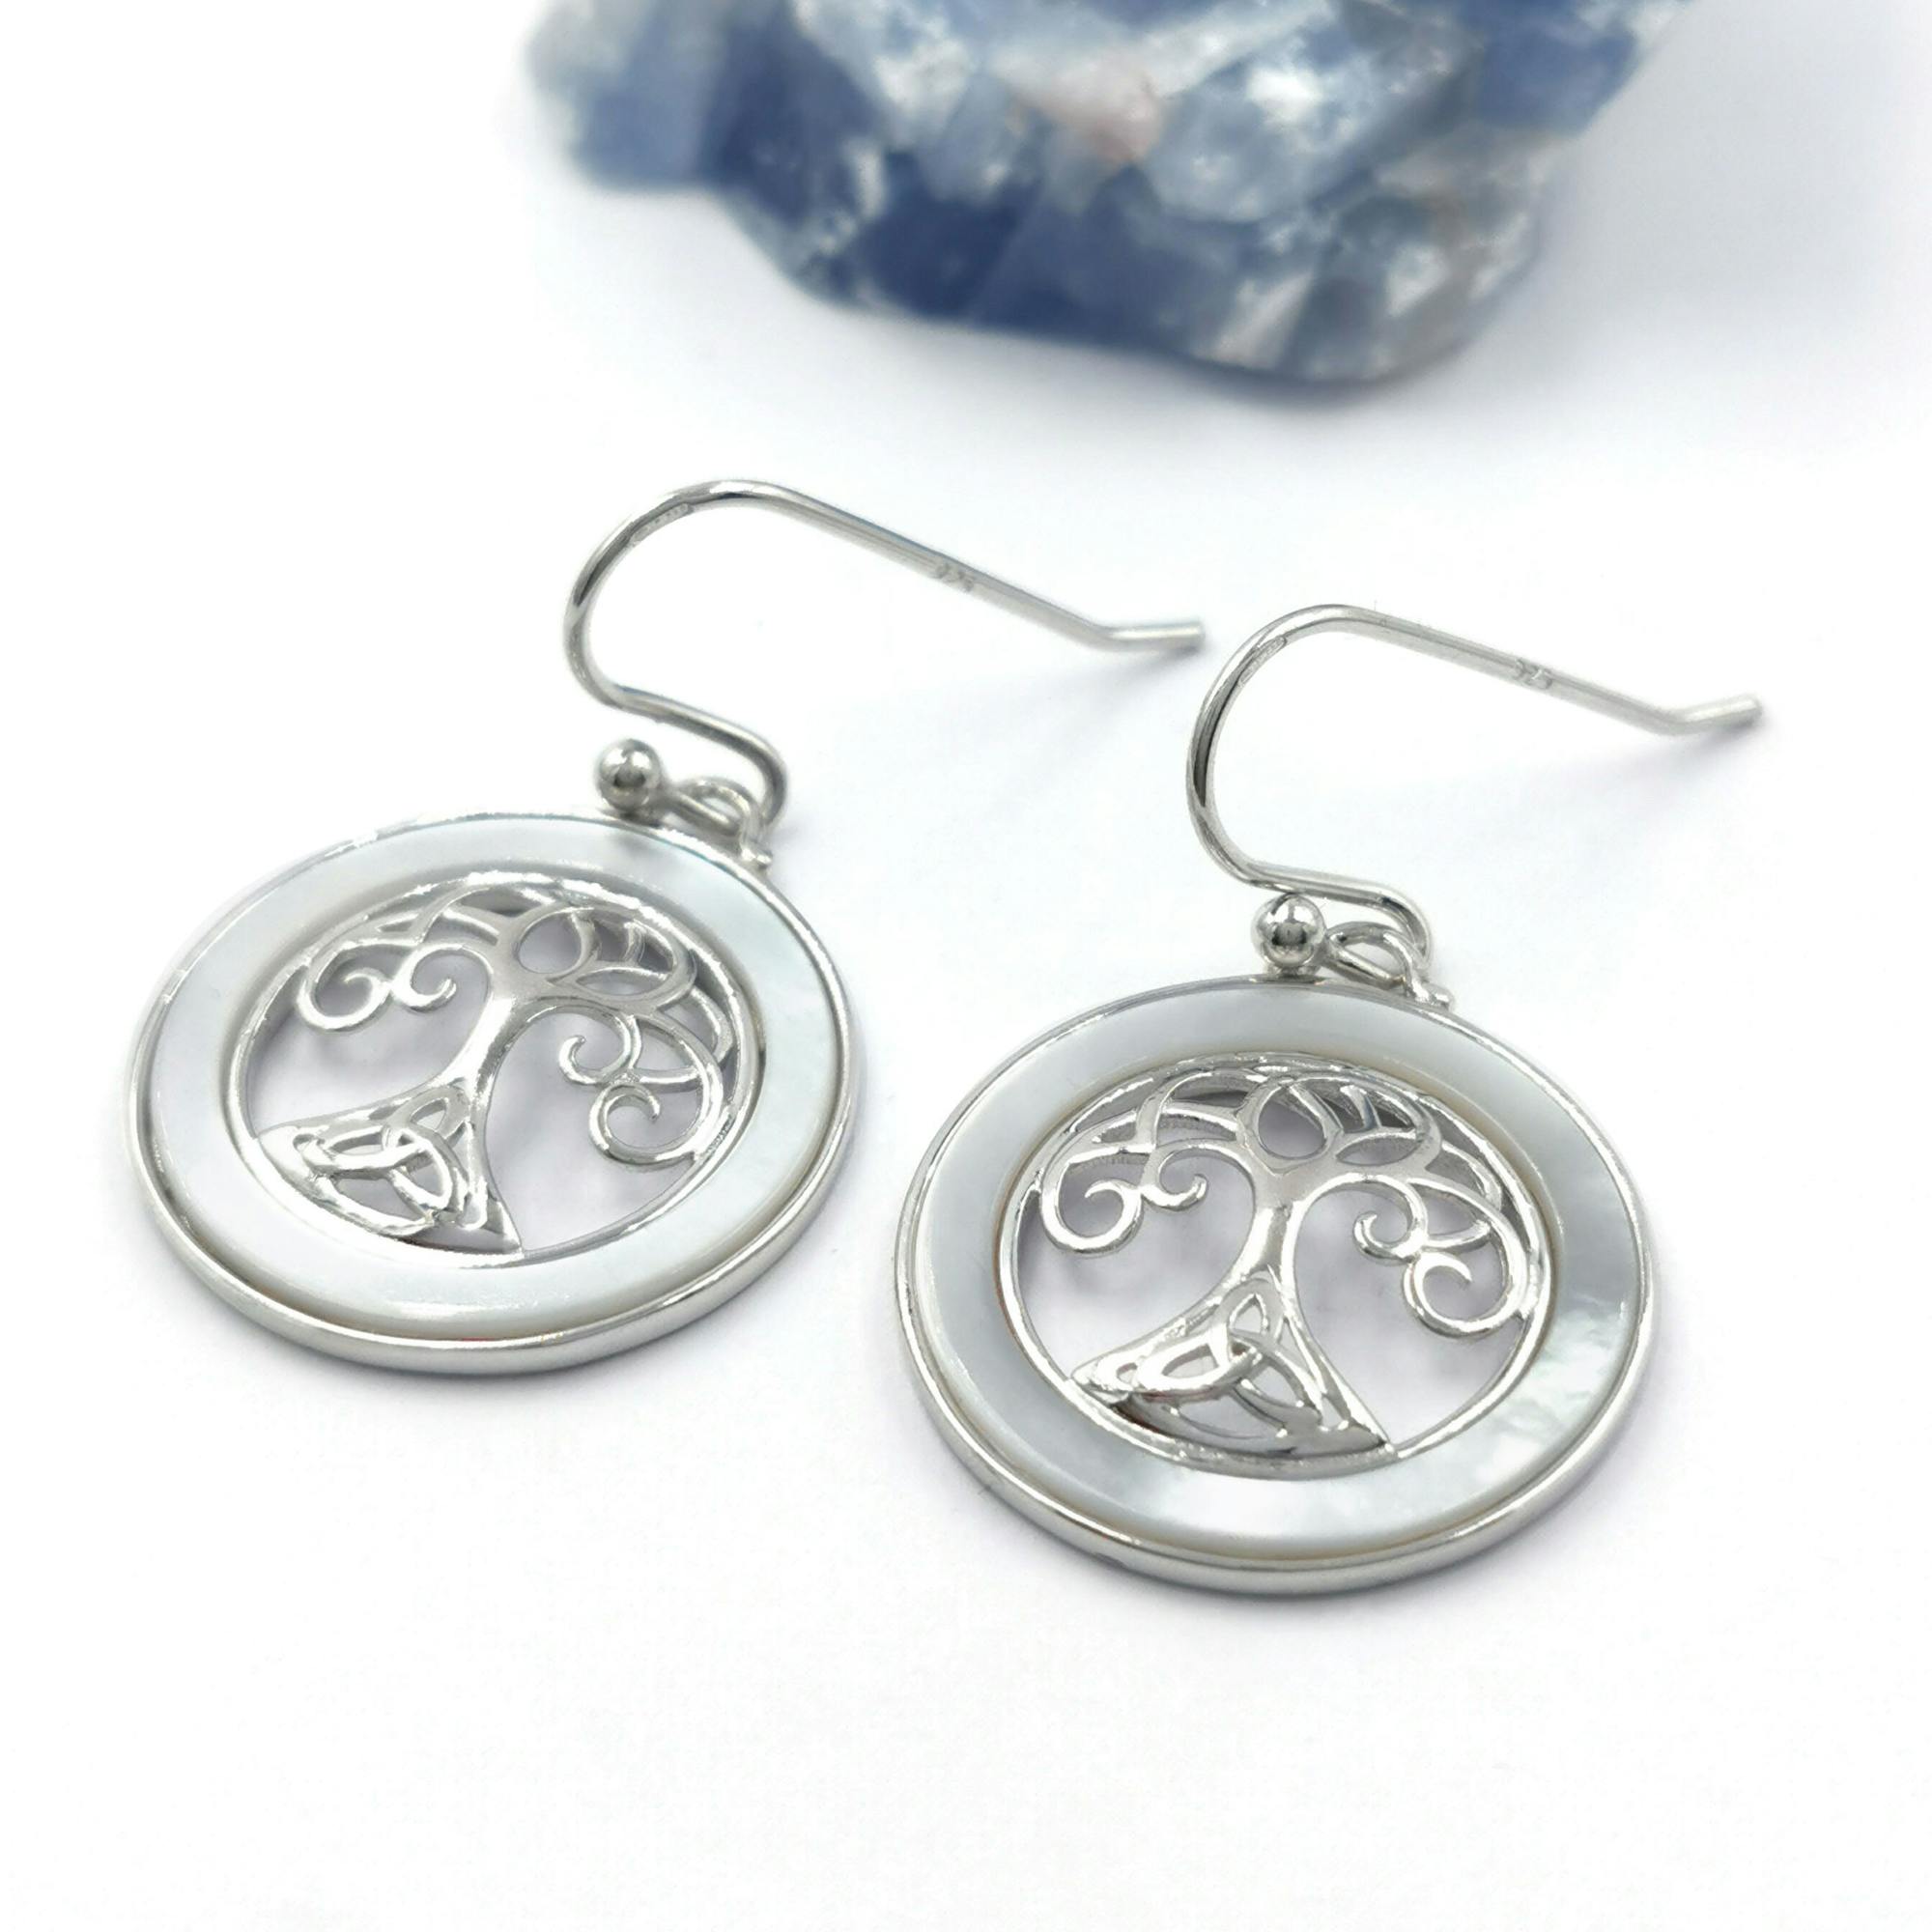 Silver Tree of Life Earrings - Womens - Real Sterling Silver 925 Hallmark - 20.0 mm x 20.0 mm - Direct from Ireland